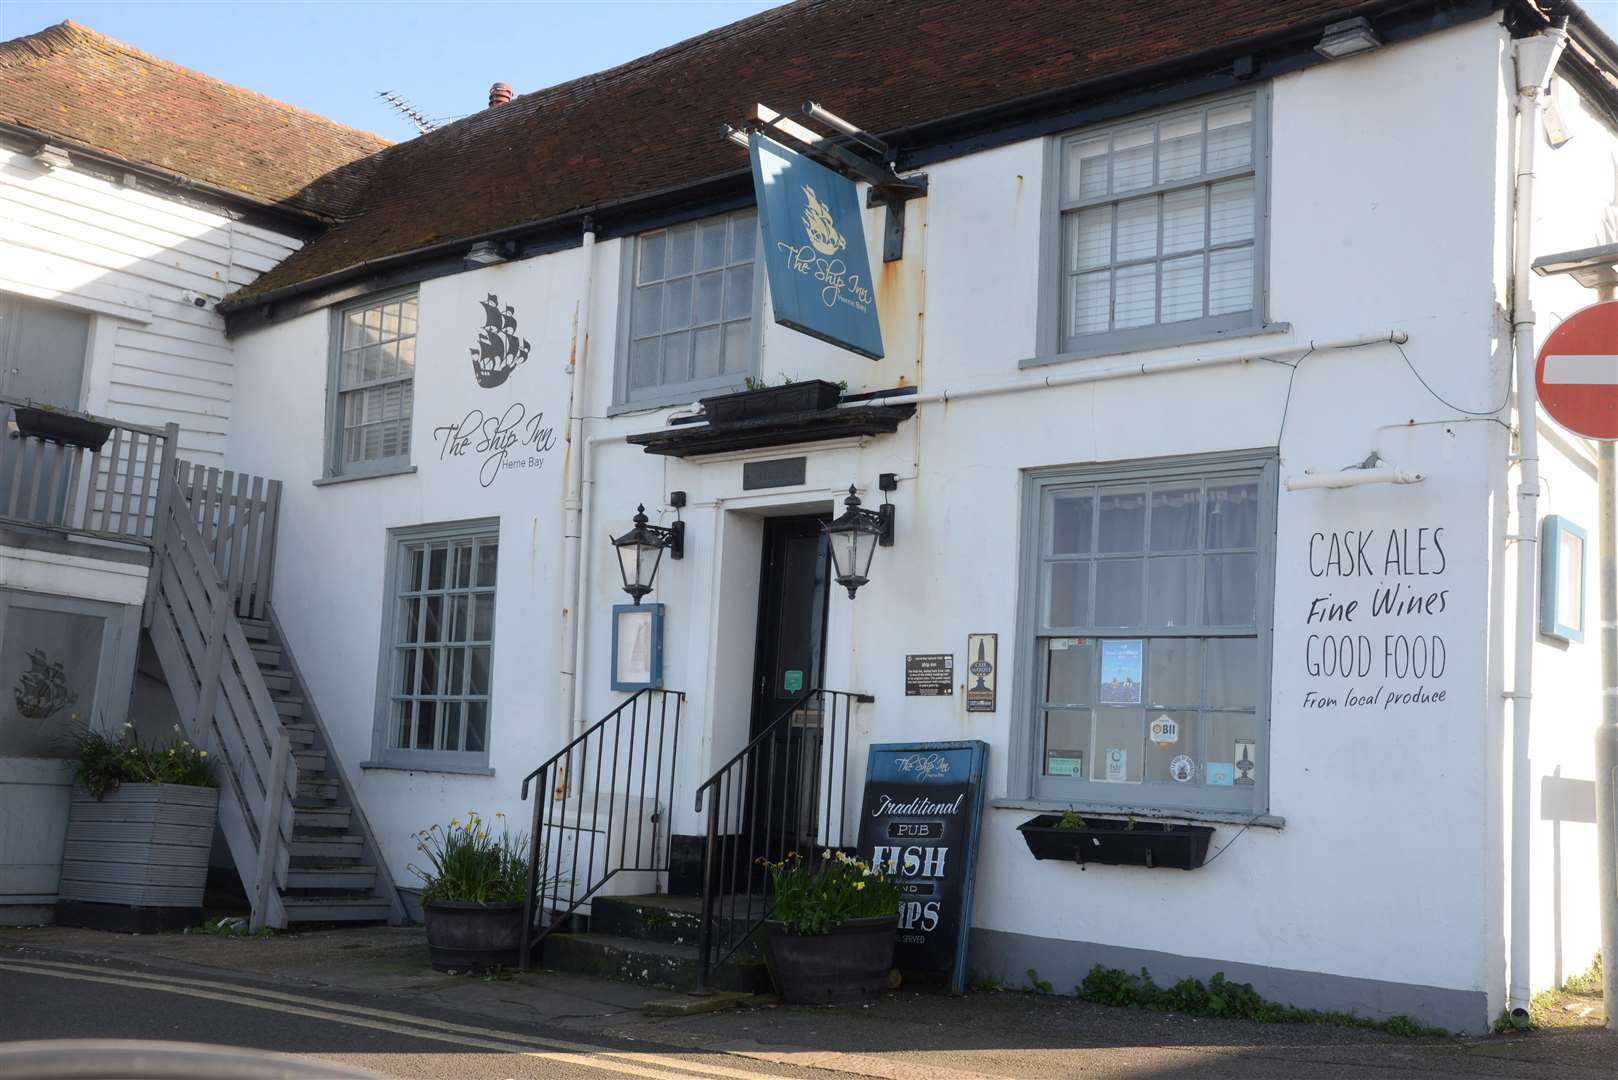 The Ship Inn on Herne Bay seafront today. Picture: Chris Davey